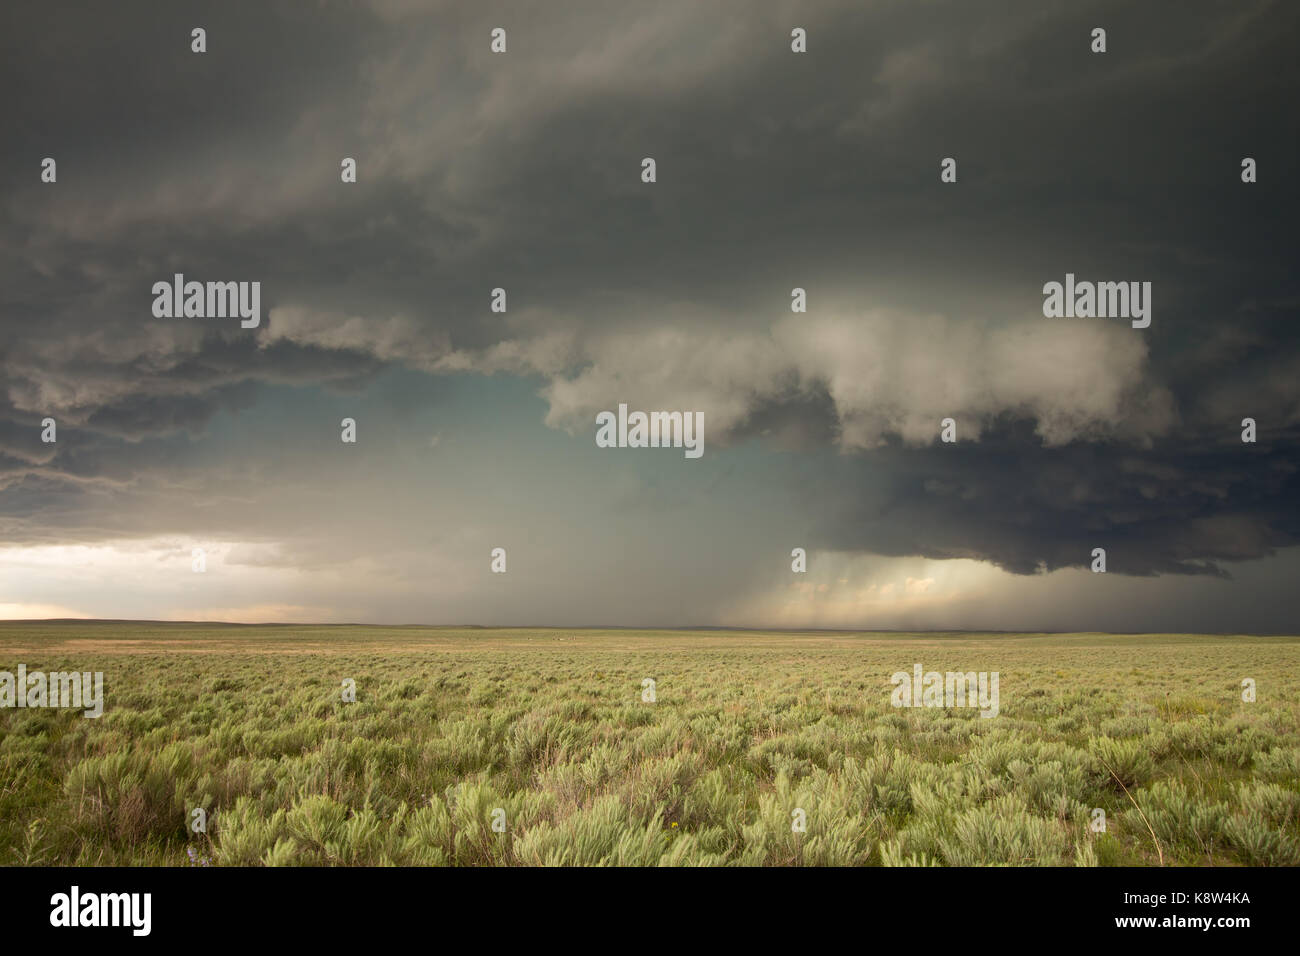 A wall cloud forms underneath a supercell thunderstorm on the high plains of eastern Colorado. Stock Photo